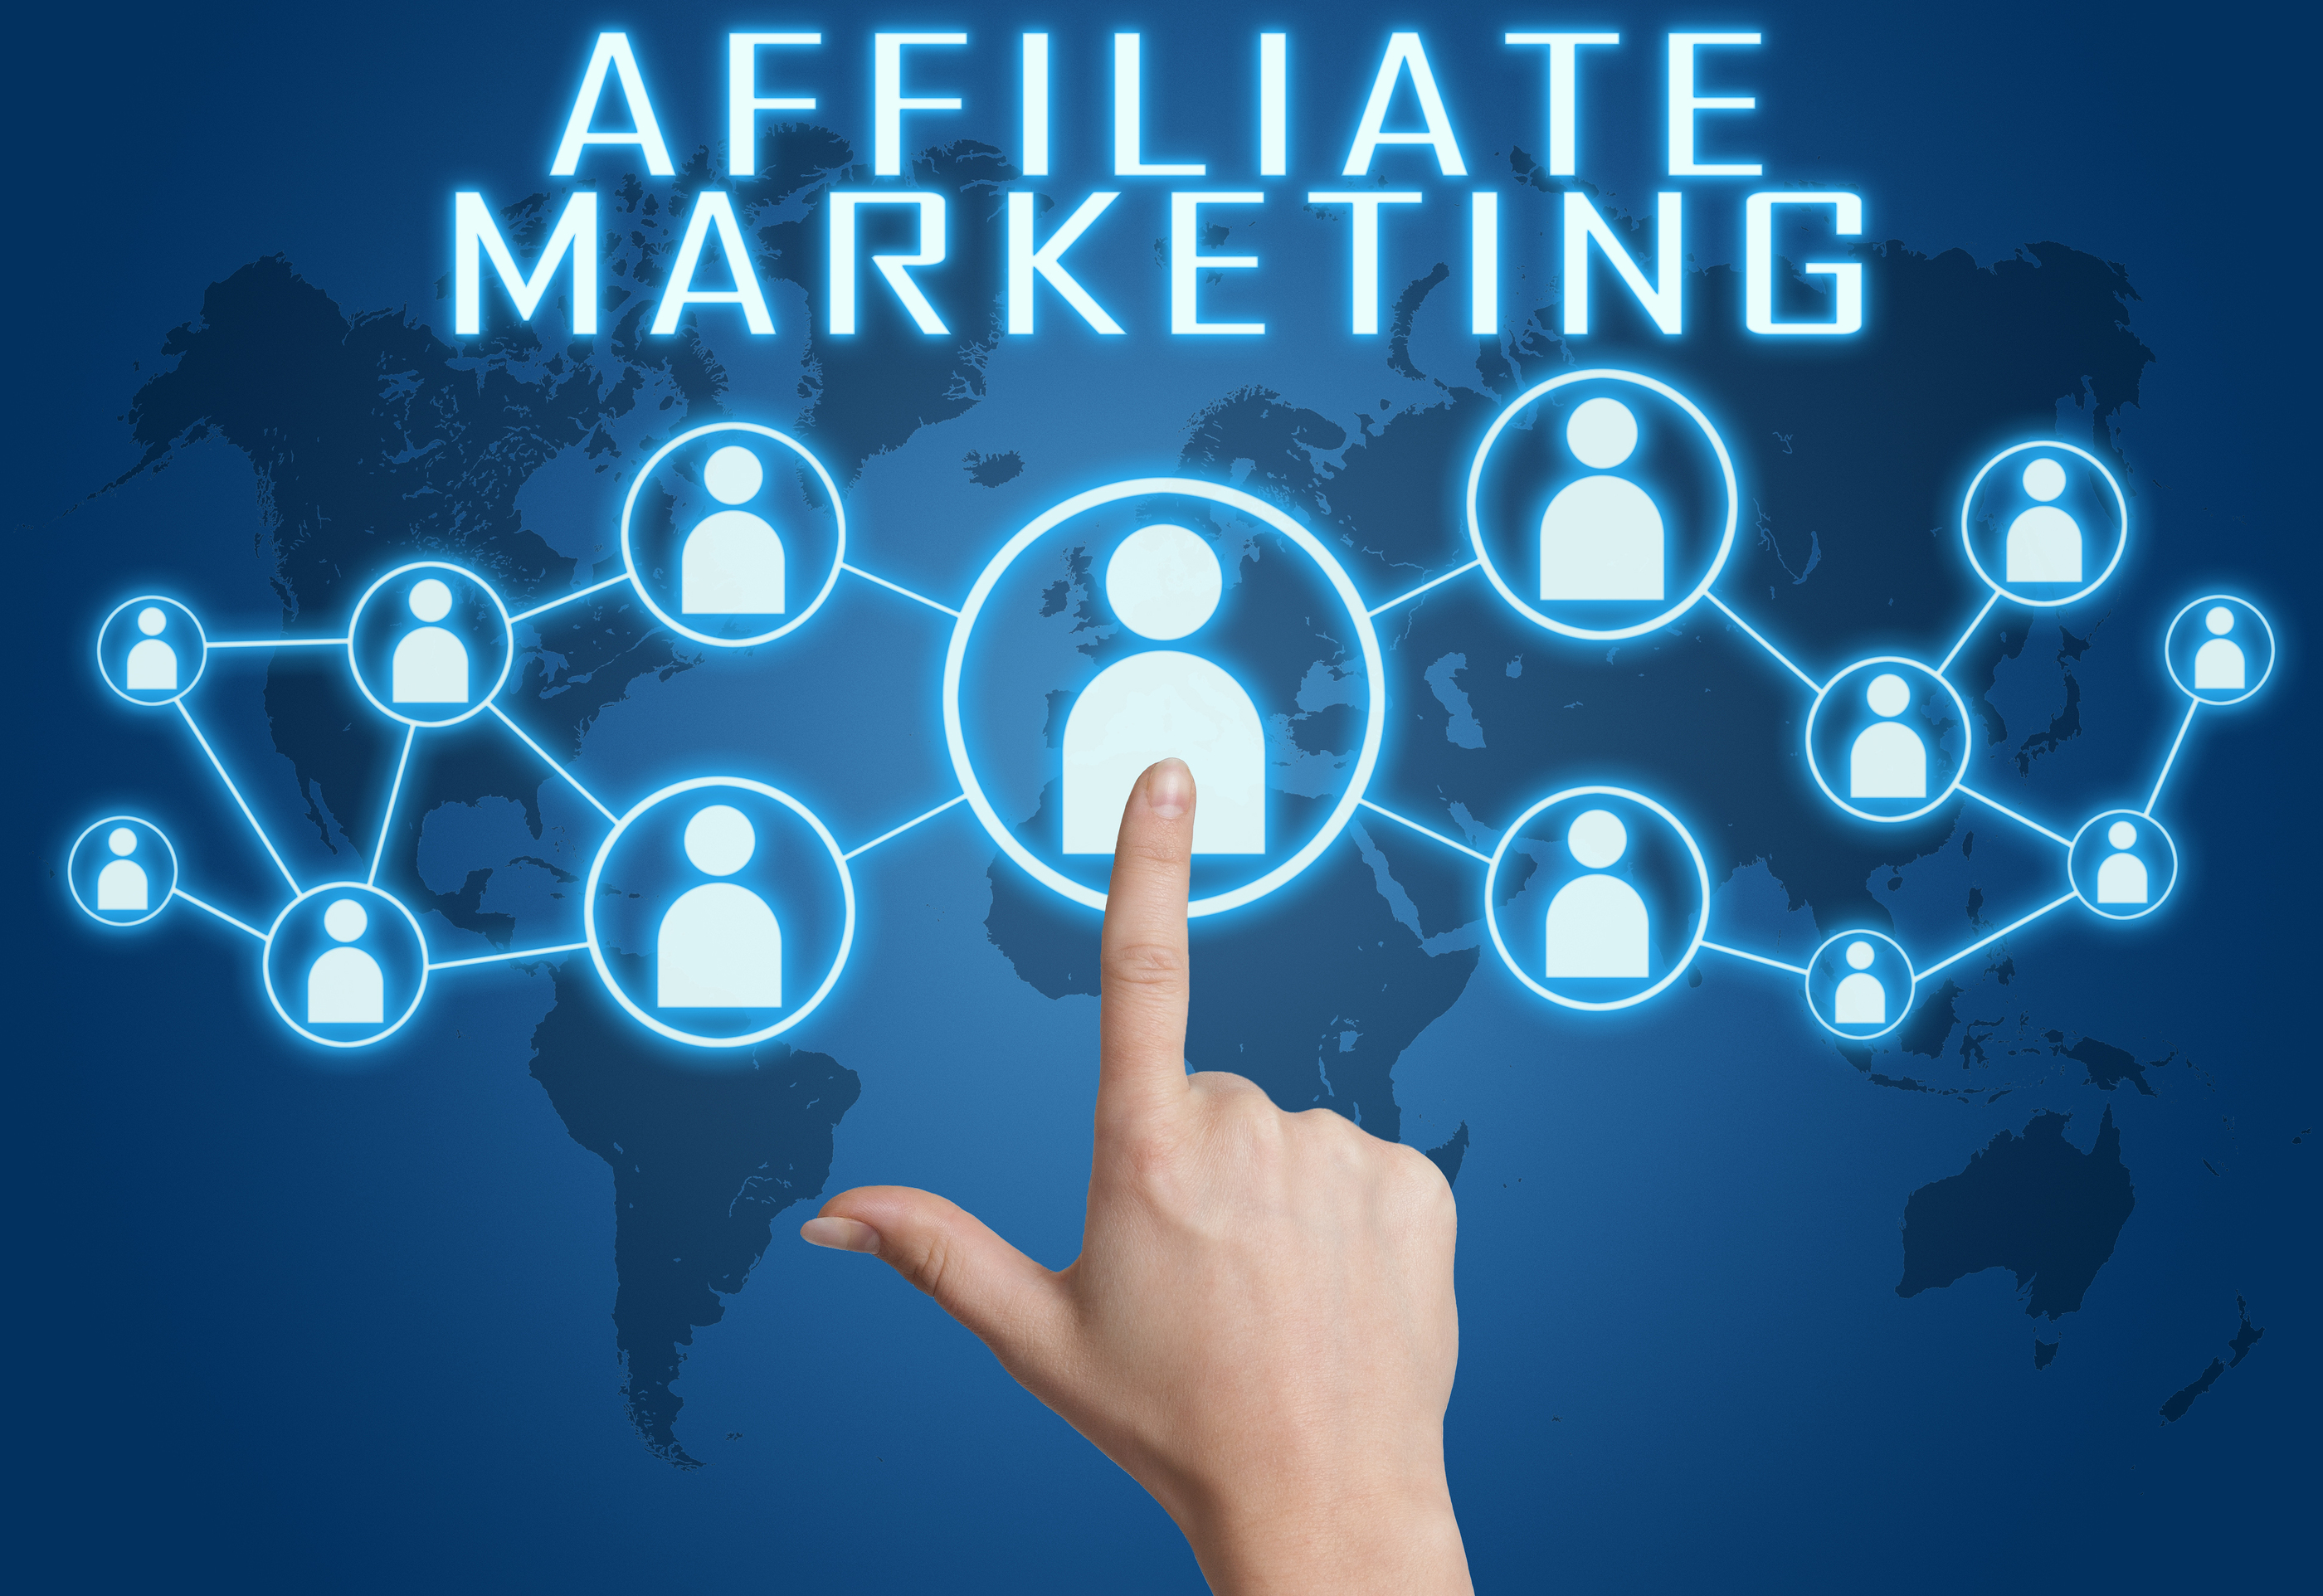 The Definitive Guide for Affiliate Marketing: A Practical Way To Make Extra Money In ...